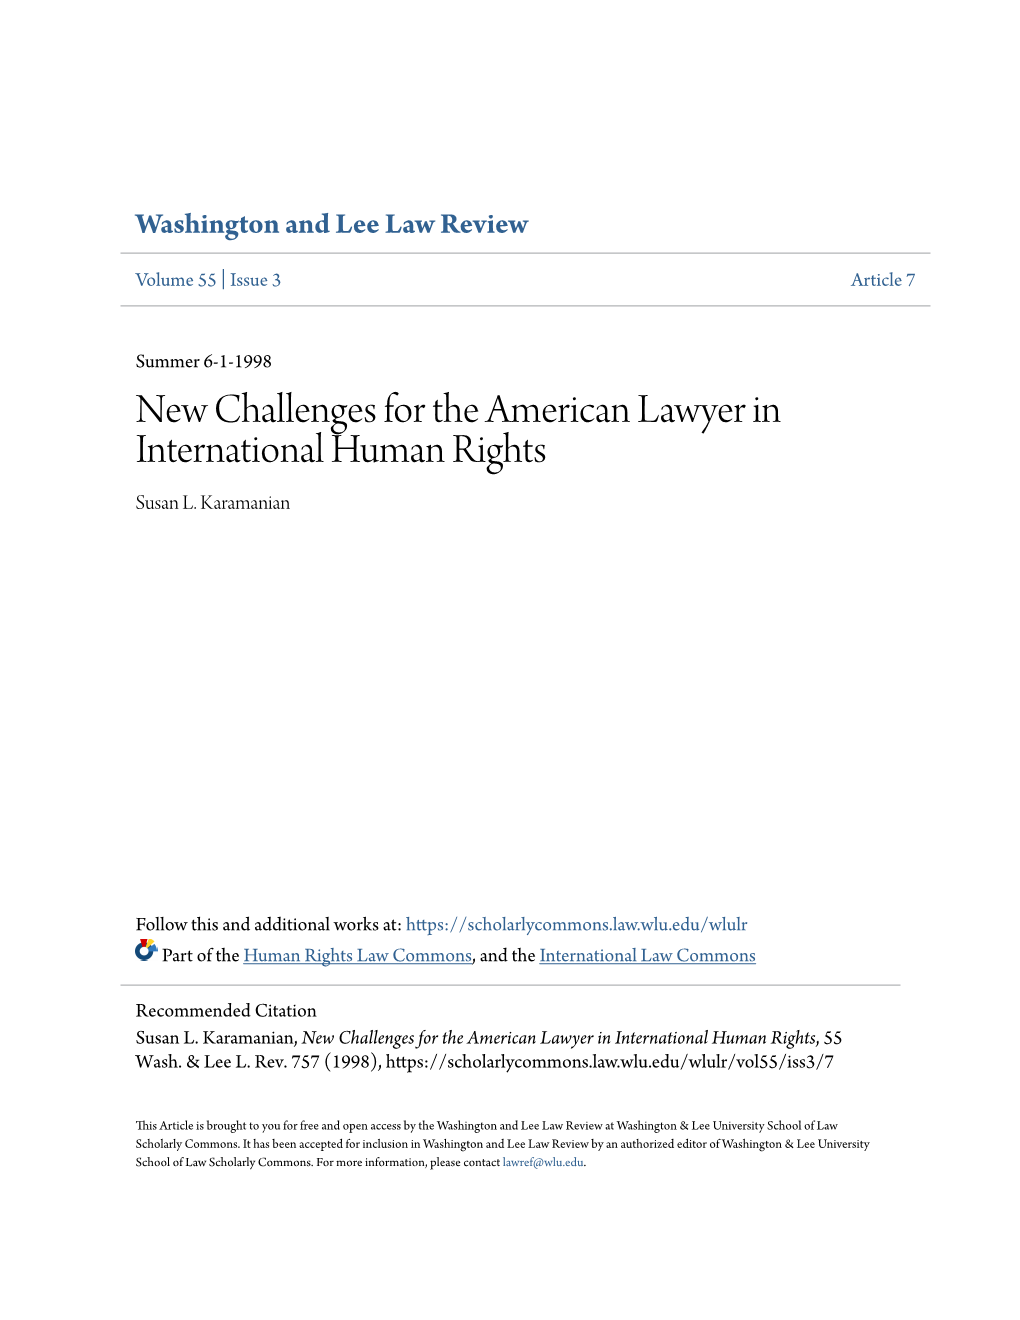 New Challenges for the American Lawyer in International Human Rights Susan L